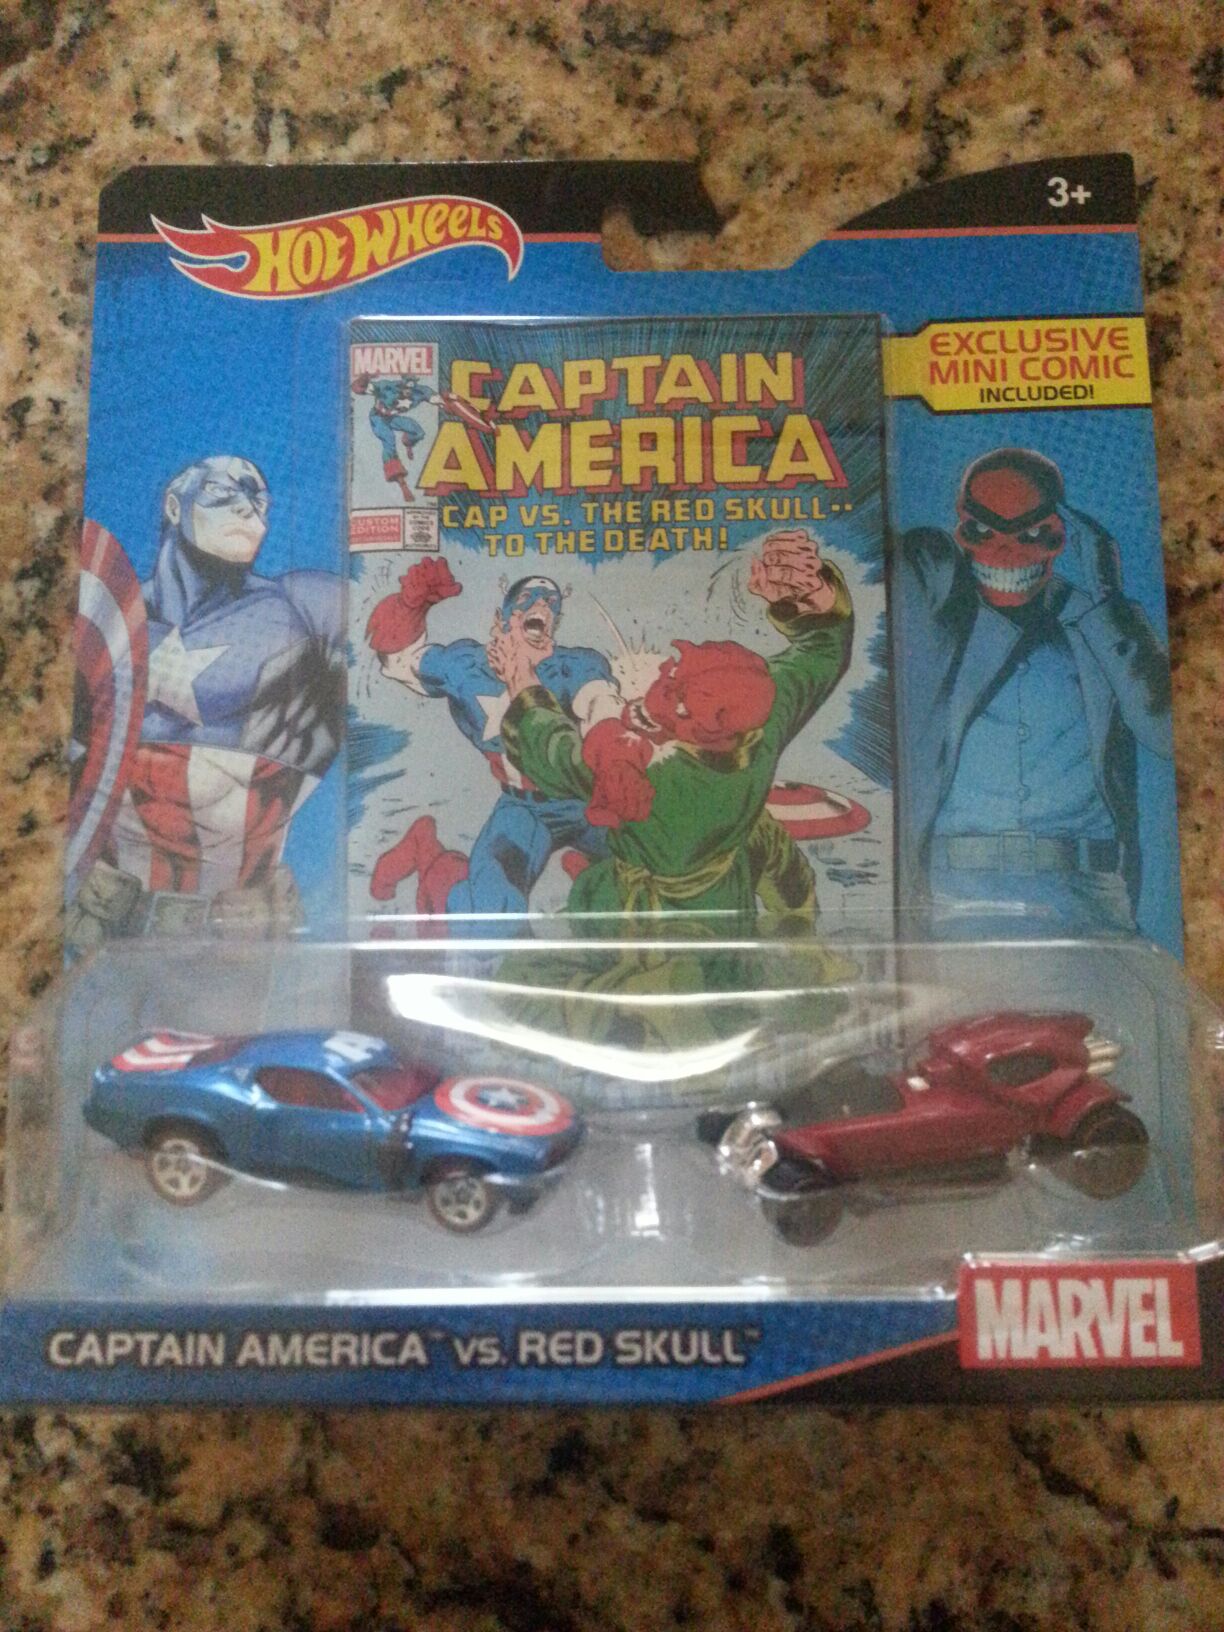 captian America vs red skull  toy car collectible - Main Image 1